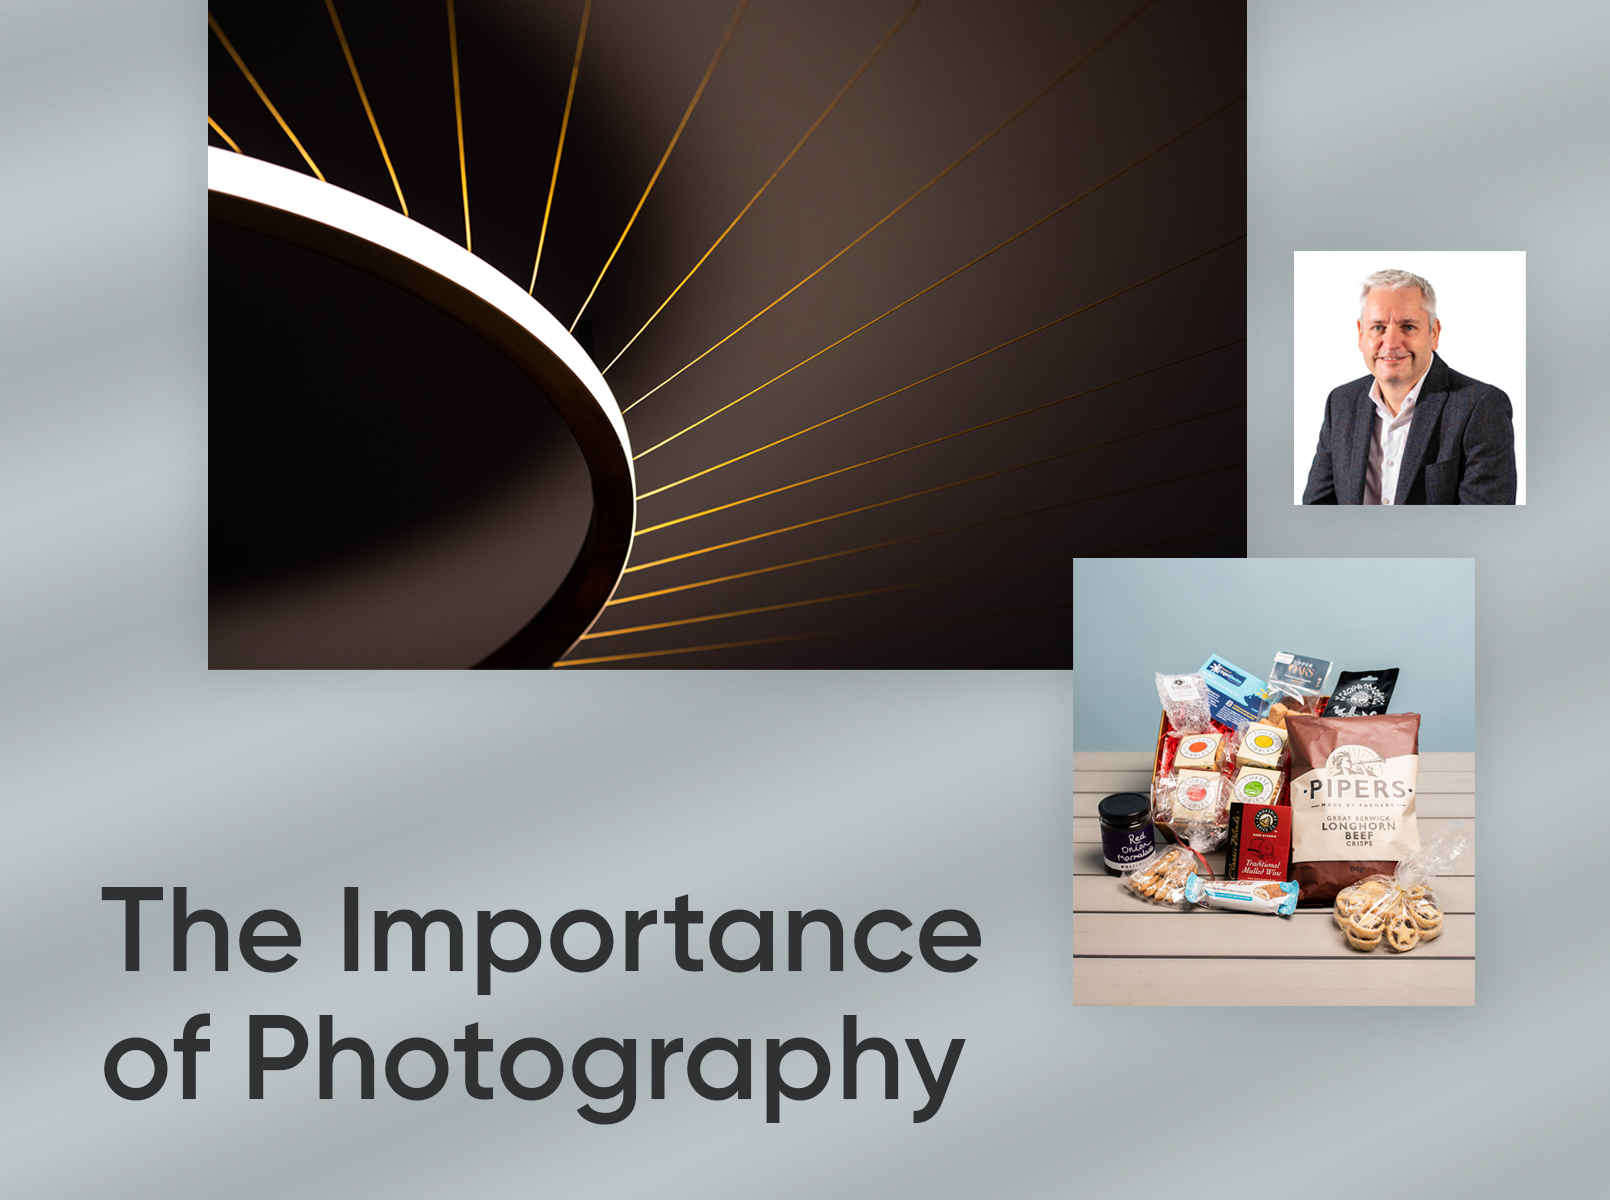 The importance of Photography